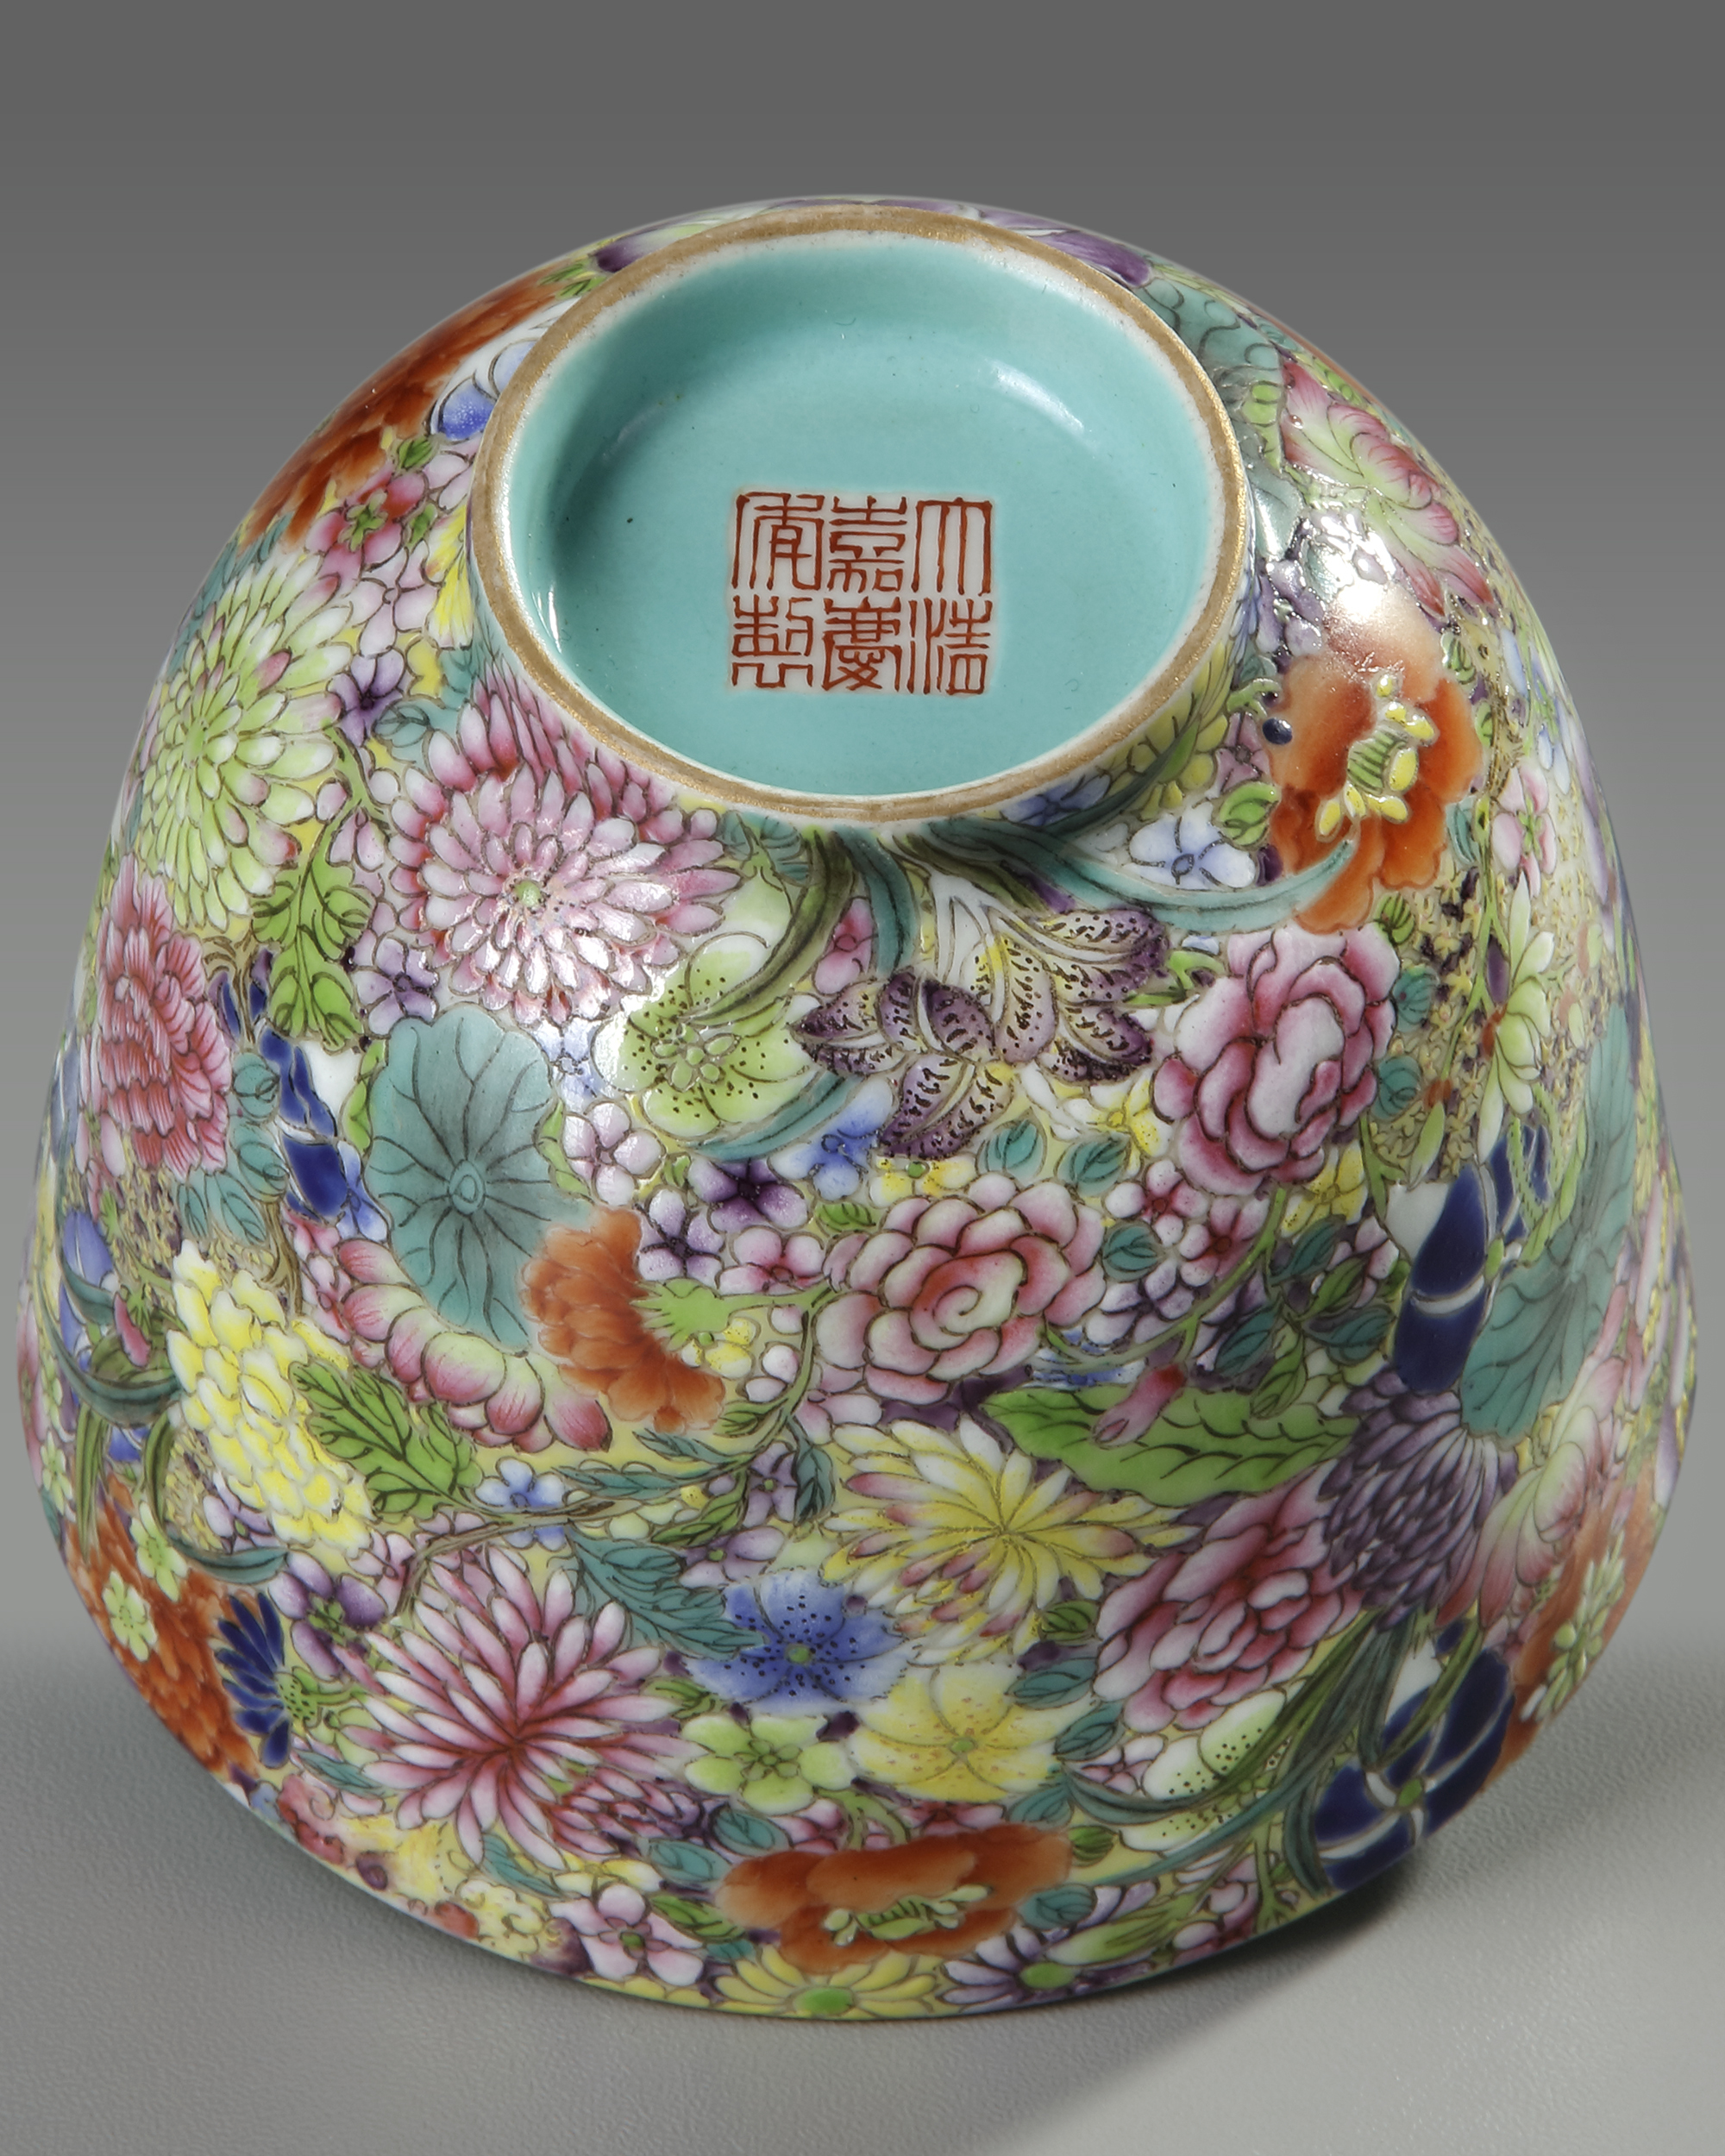 A CHINESE FAMILLE-ROSE 'MILLE-FLEURS' CUP, 19TH-20TH CENTURY - Image 2 of 4